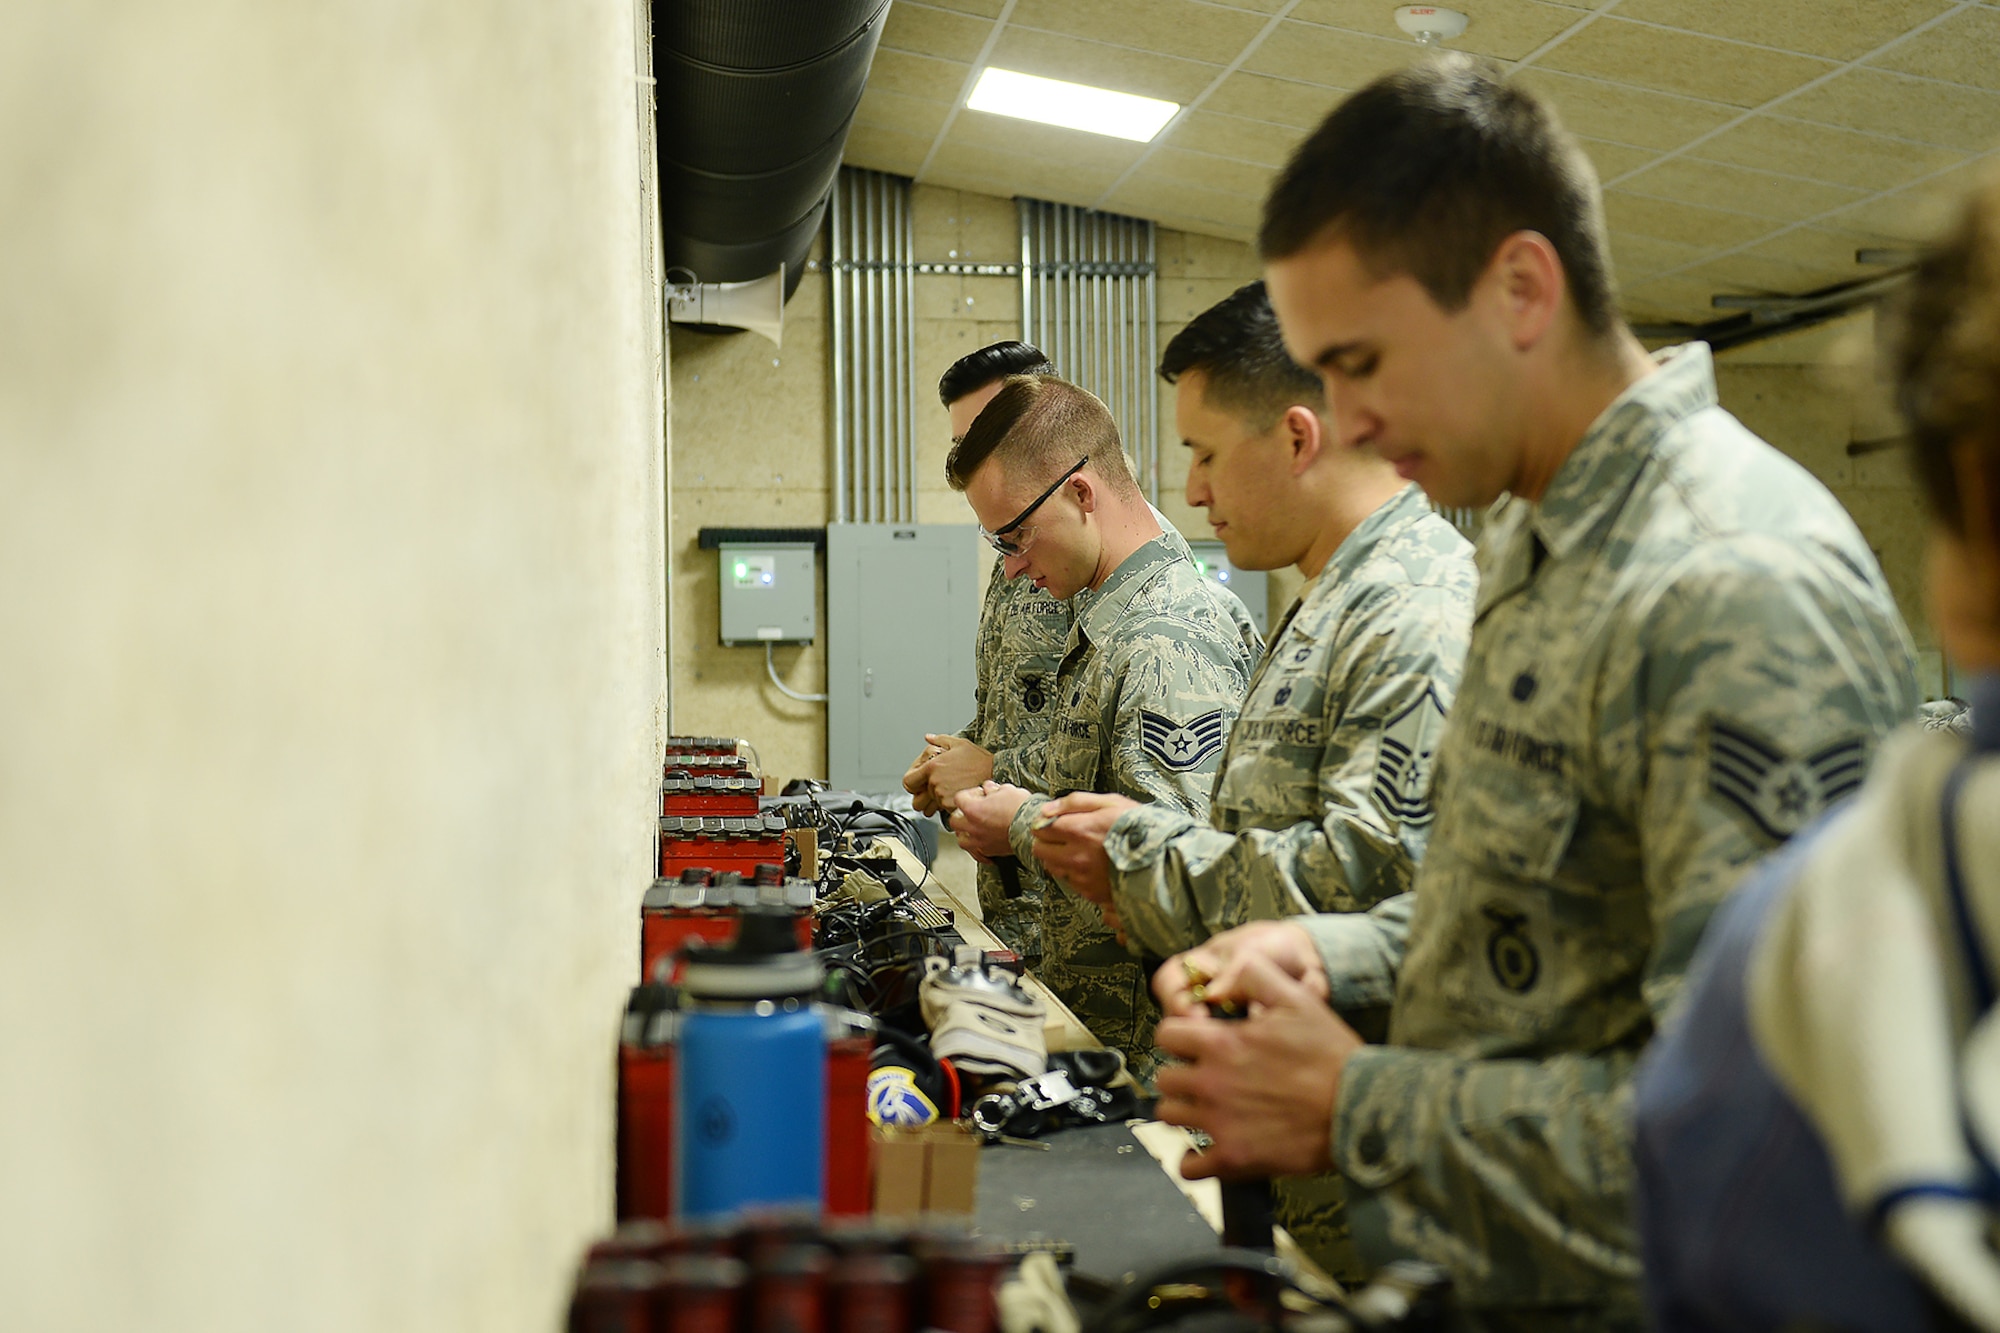 55th Security Forces Squadron airmen load bullets into magazines during an excellence in competition and shooting event May 14, 2018, at Offutt Air Force Base, Nebraska. The event was part of National Police Week which gives special recognition to all law enforcement officers who have dedicated their lives to protecting communities through service. (U.S. Air Force photo by Charles J. Haymond)